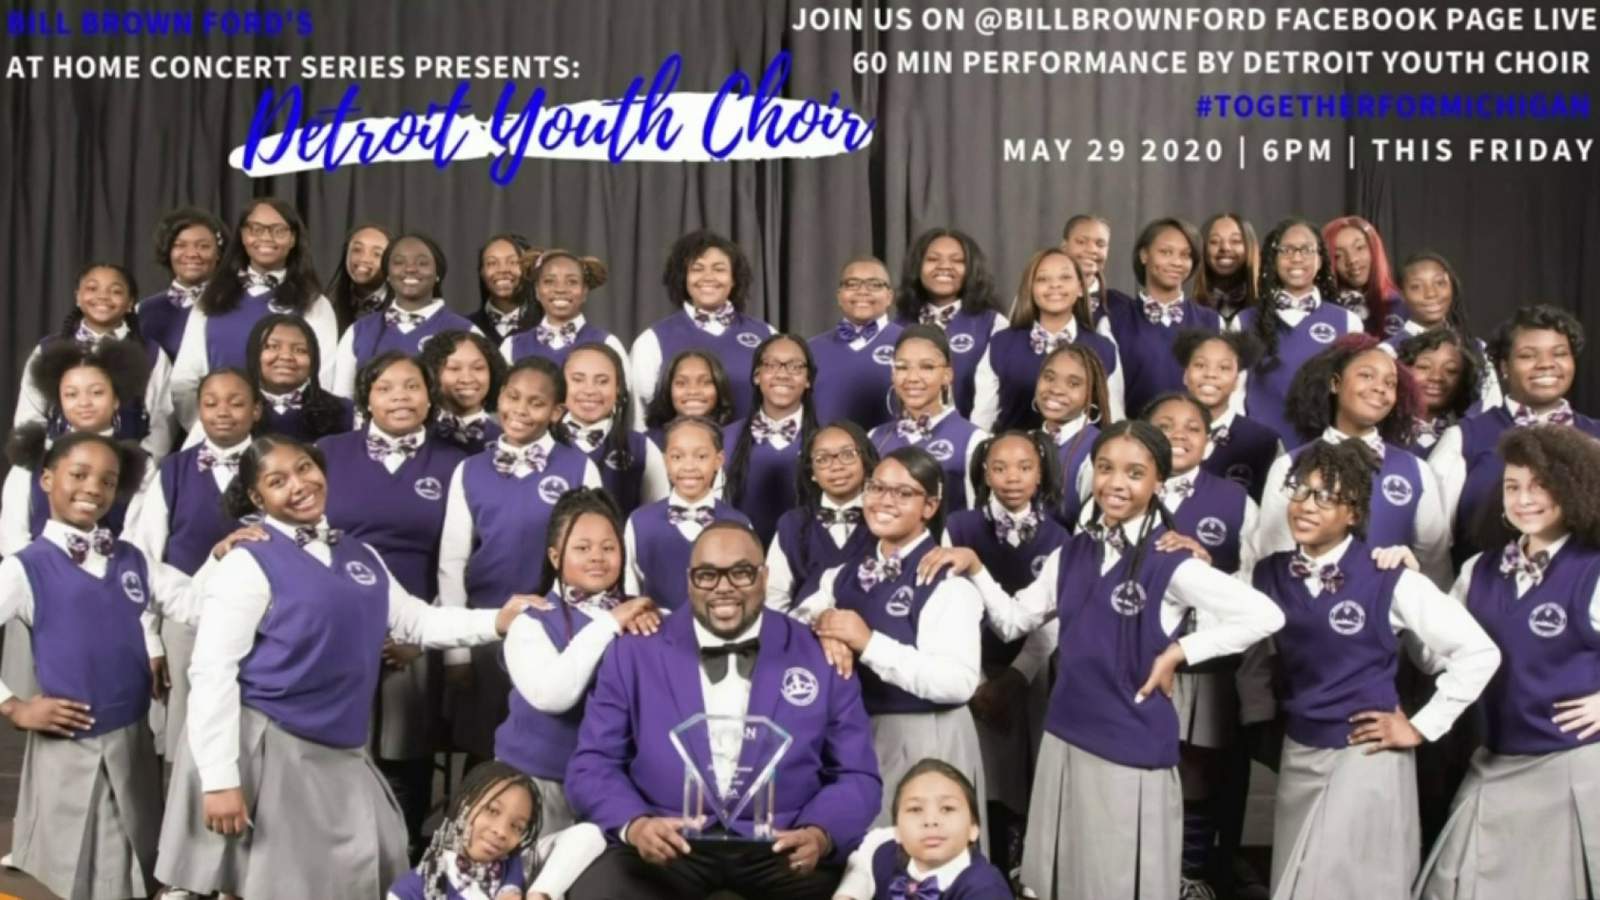 Watch Detroit Youth Choir perform for the Bill Brown Ford Concert Series